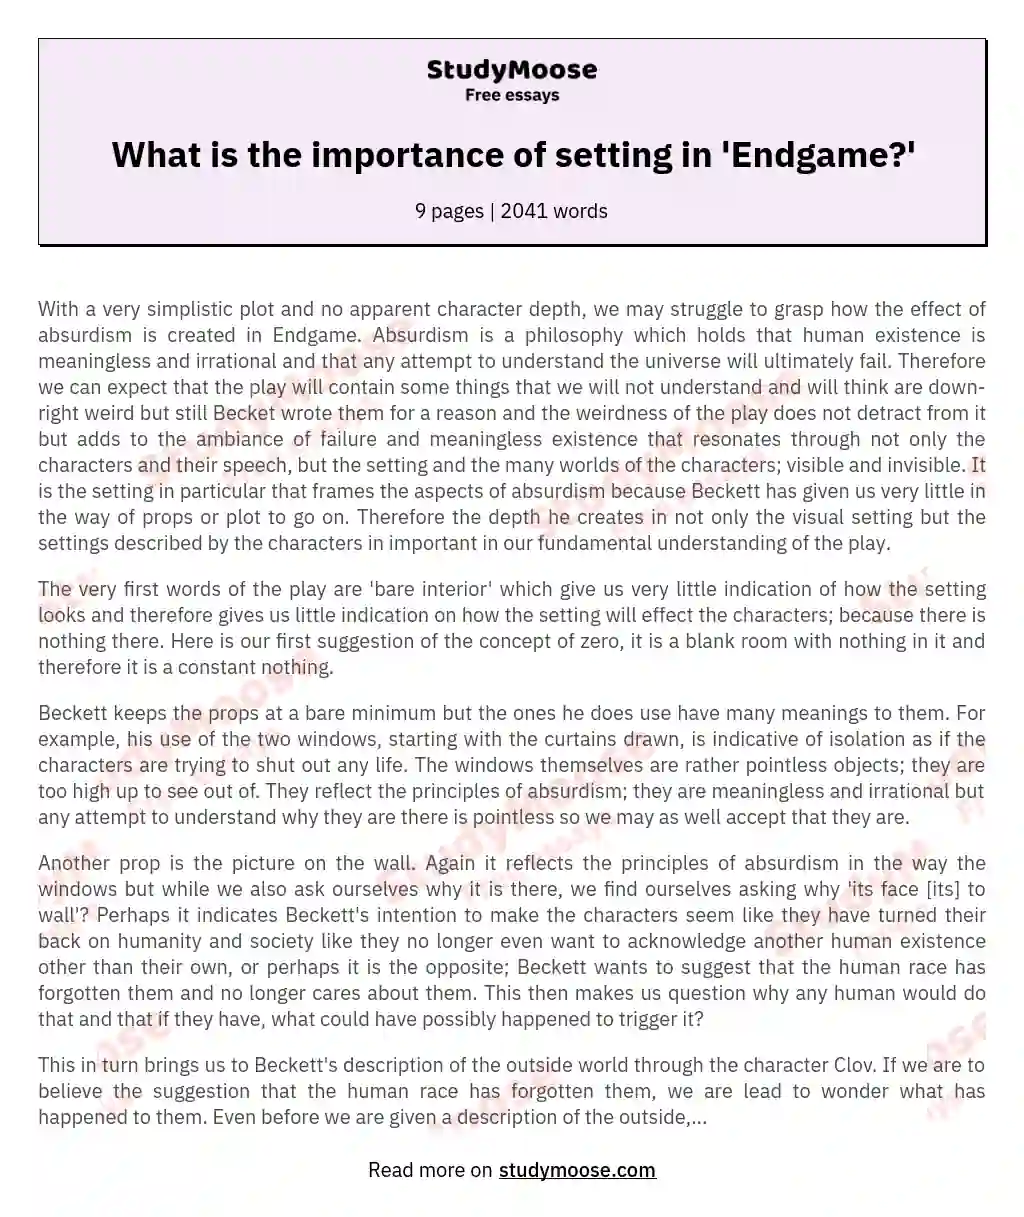 What is the importance of setting in 'Endgame?' essay